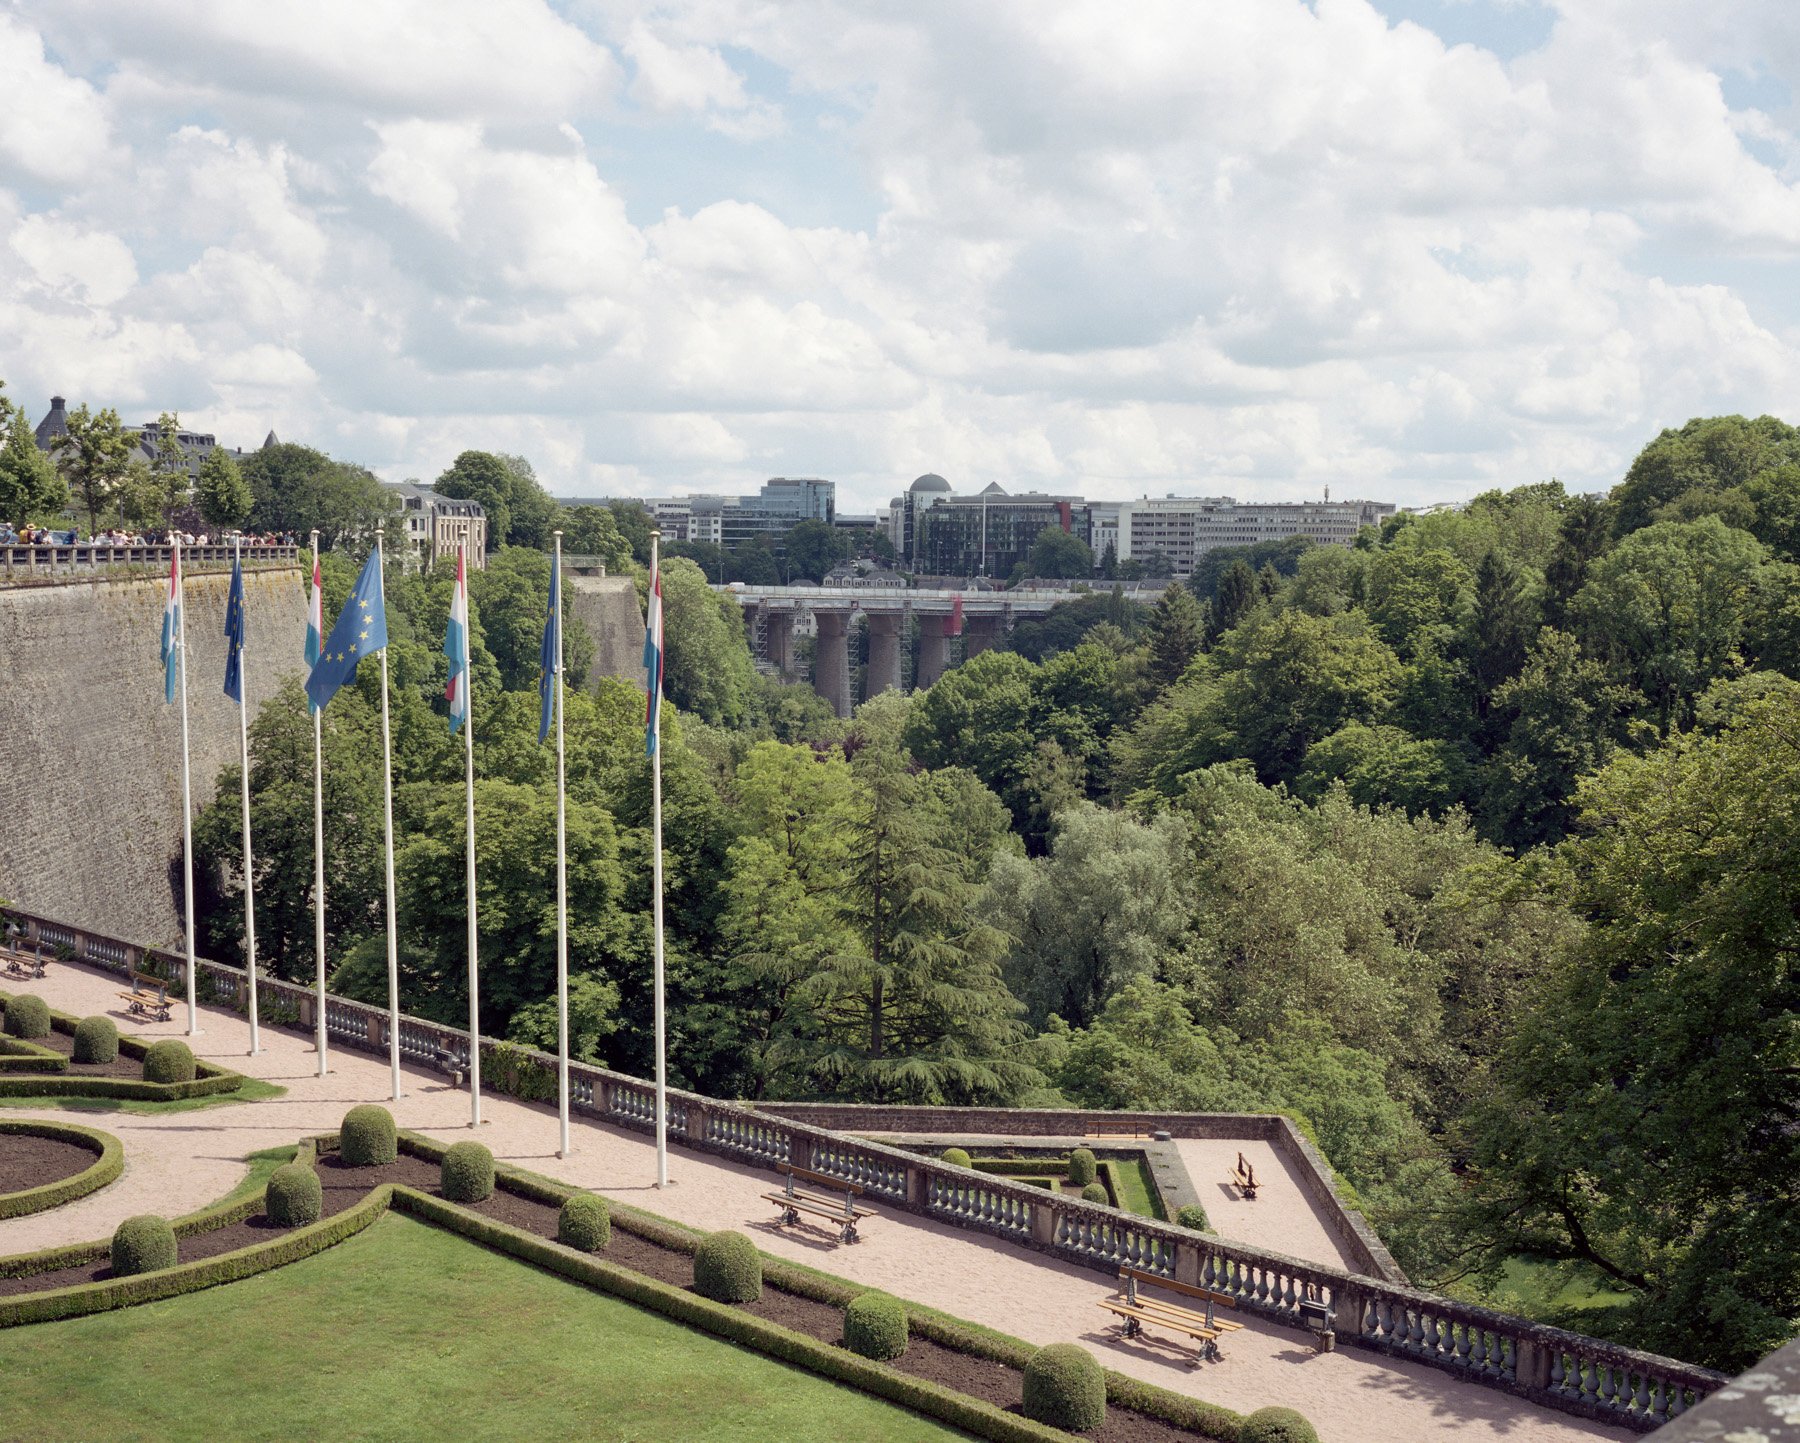  Luxembourg, Luxembourg, 2019. A view of the city center. In 2011, according to IMF, Luxembourg was the second richest country in the world. Its economy is mainly based in banking and finance. Luxembourg is the world’s second largest investment fund 